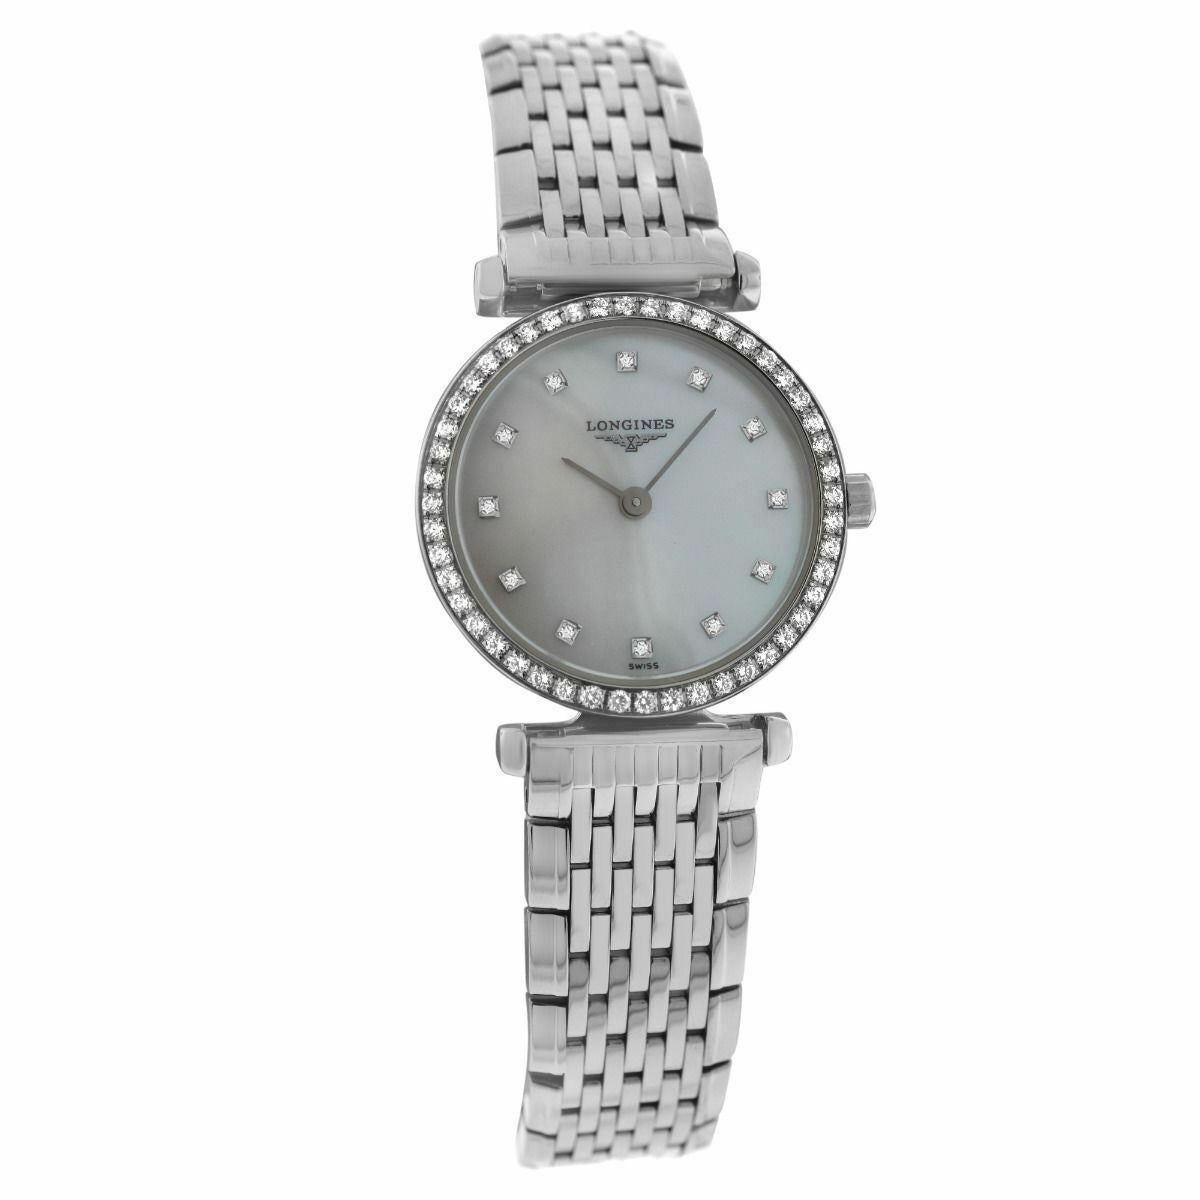 Brand	Longines
Model	La Grande Classique L42410806 or L4.241.0.80.6
Gender	Ladies
Condition	New 
Movement	Quartz
Case Material	Stainless Steel with Diamond Bezel
Bracelet / Strap Material	Stainless Steel 
Clasp / Buckle Material	Stainless